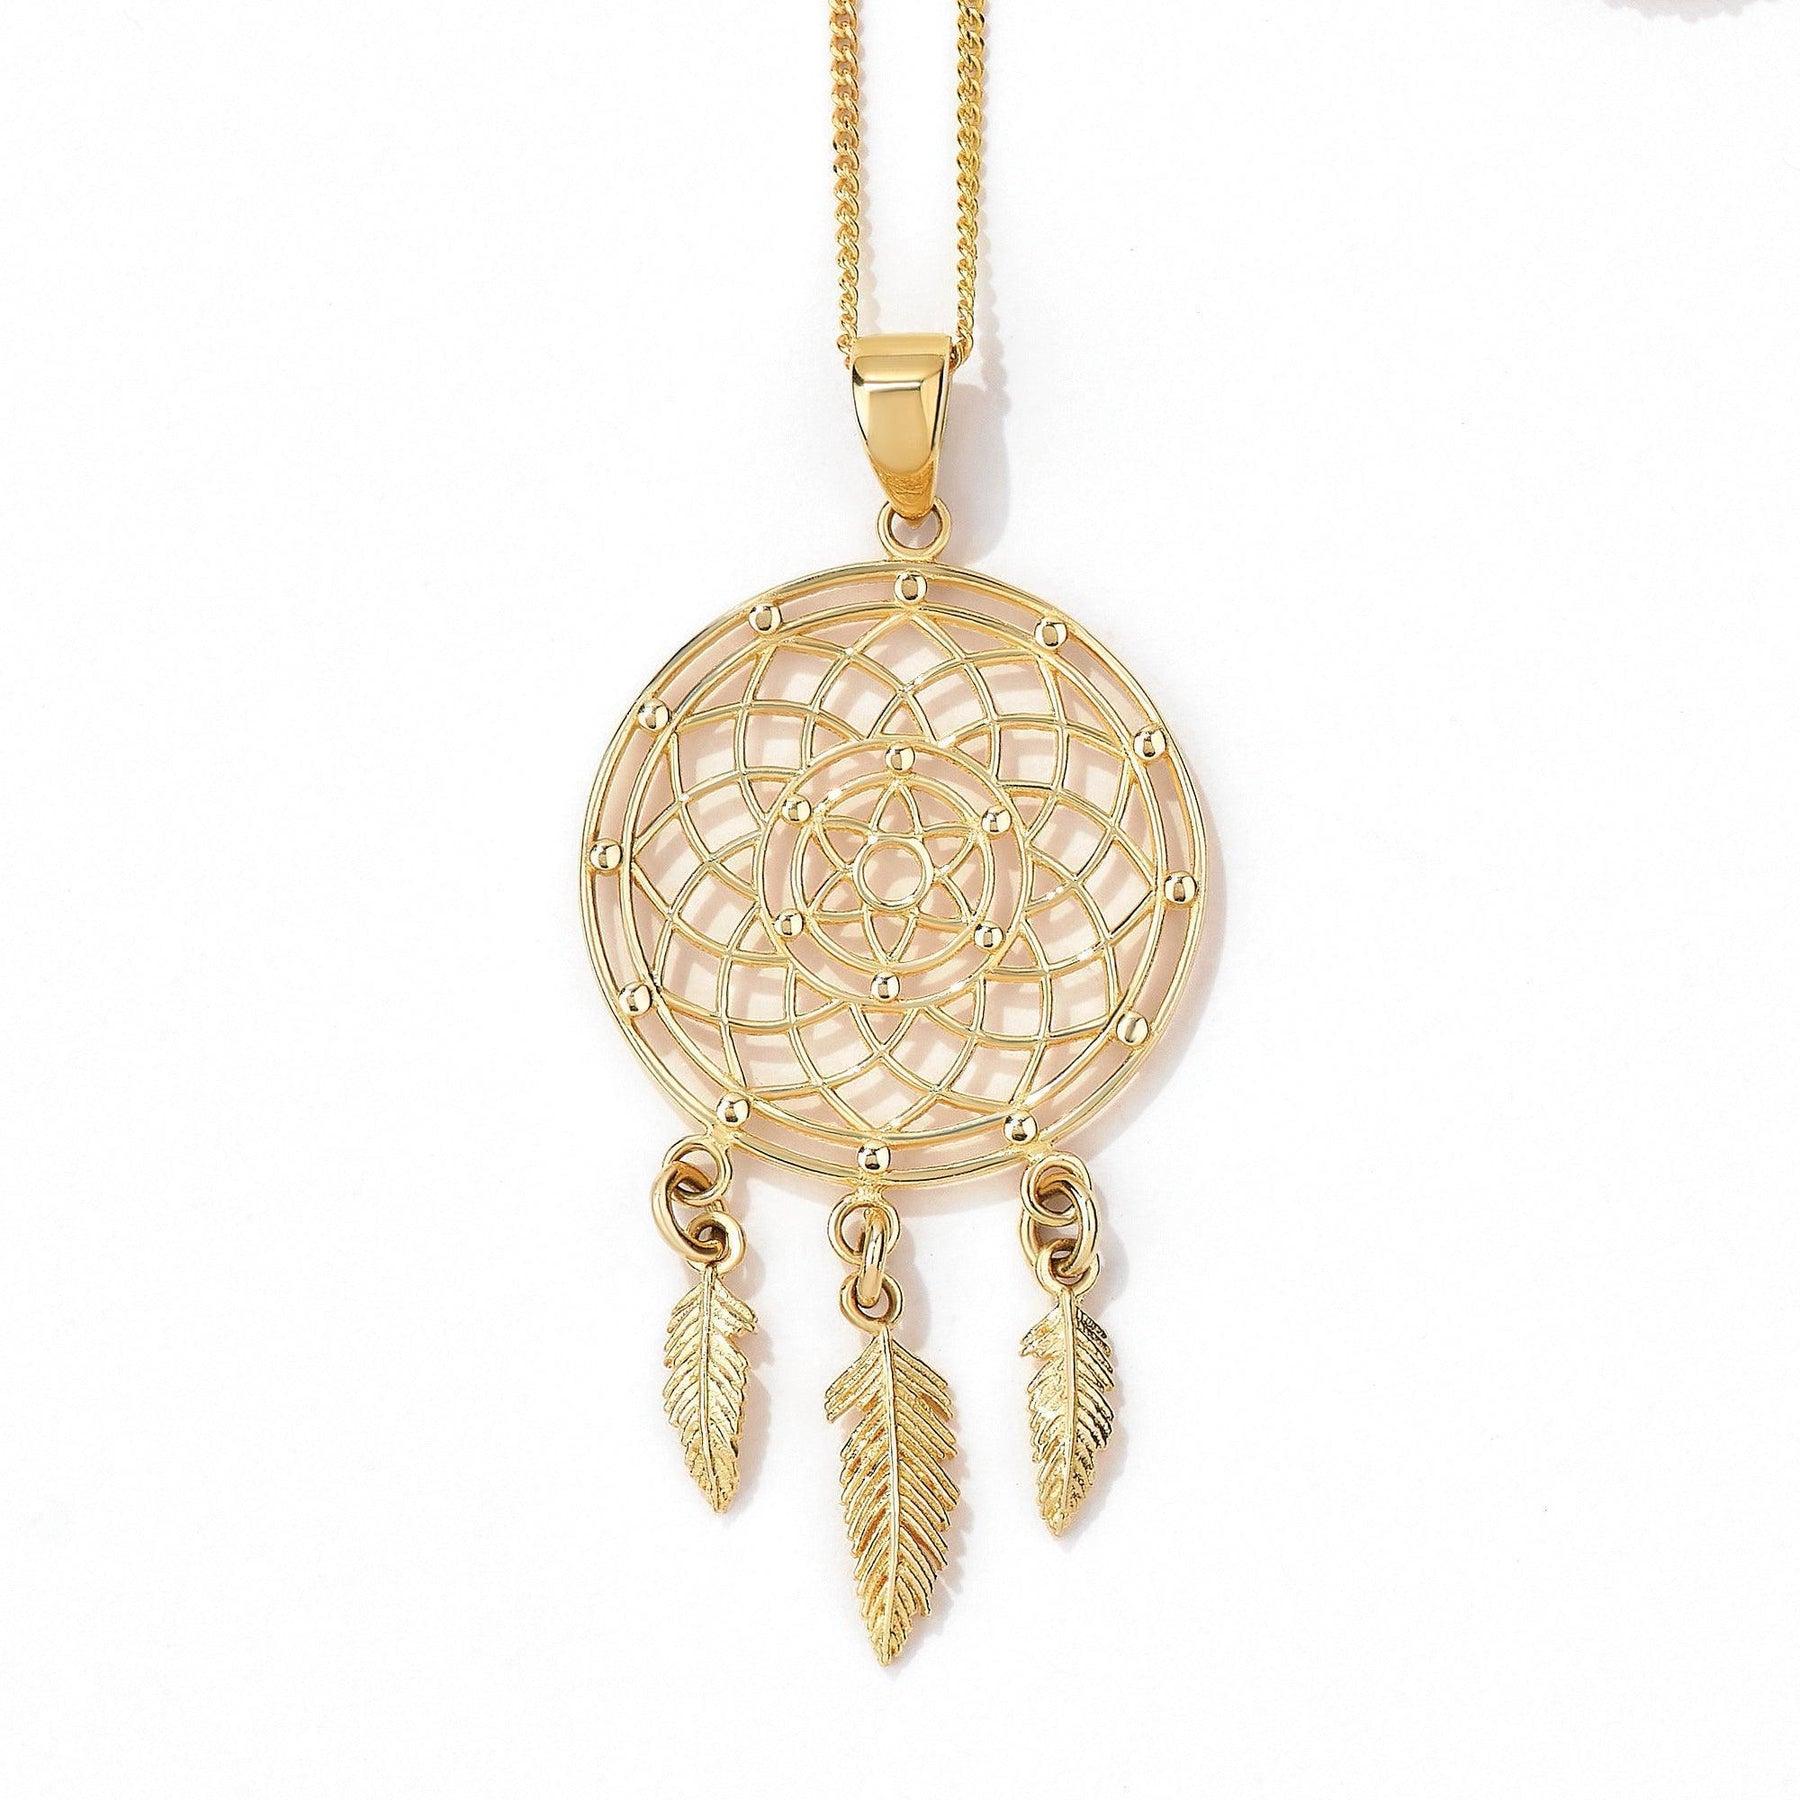 Gold And Turquoise Flower Dream Catcher Pendant Necklace